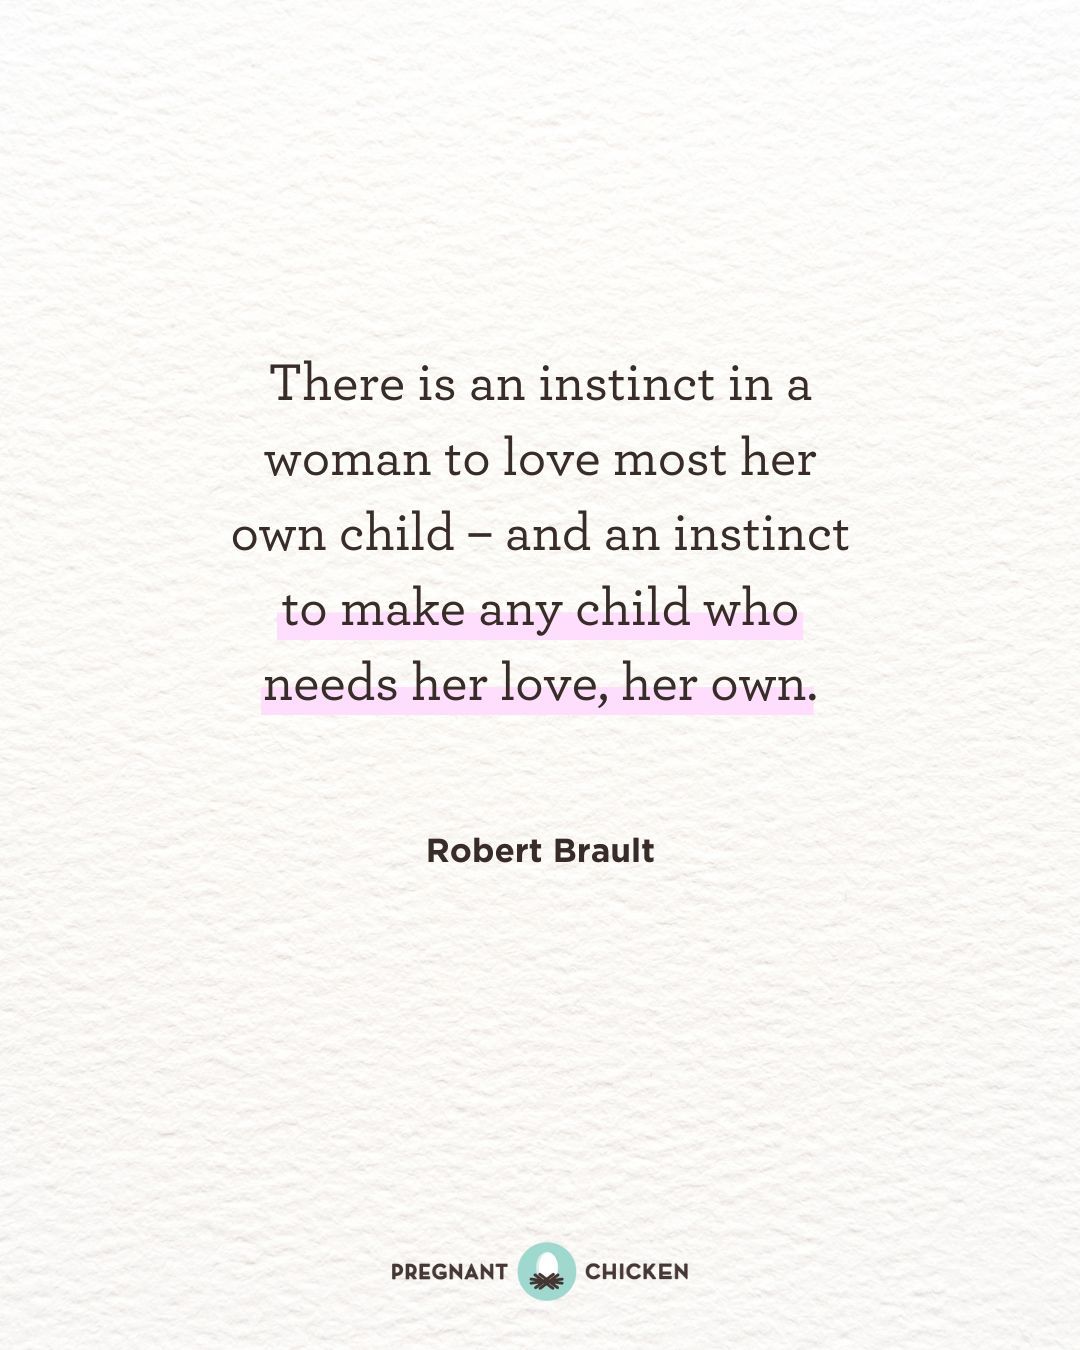 There is an instinct in a woman to love most her own child – and an instinct to make any child who needs her love, her own.